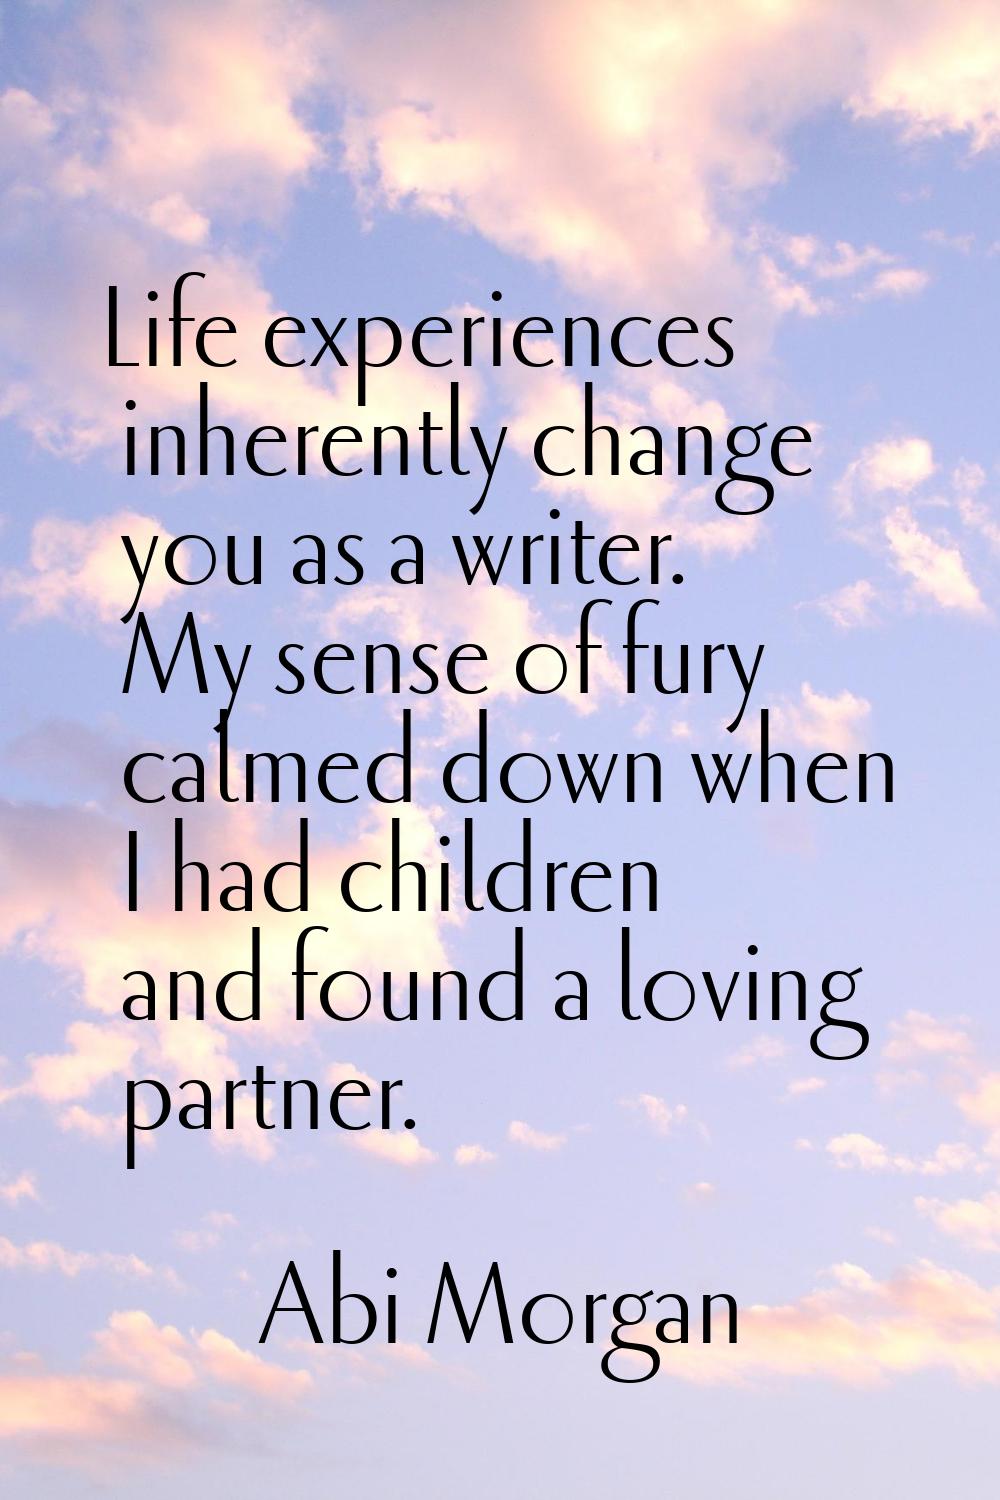 Life experiences inherently change you as a writer. My sense of fury calmed down when I had childre